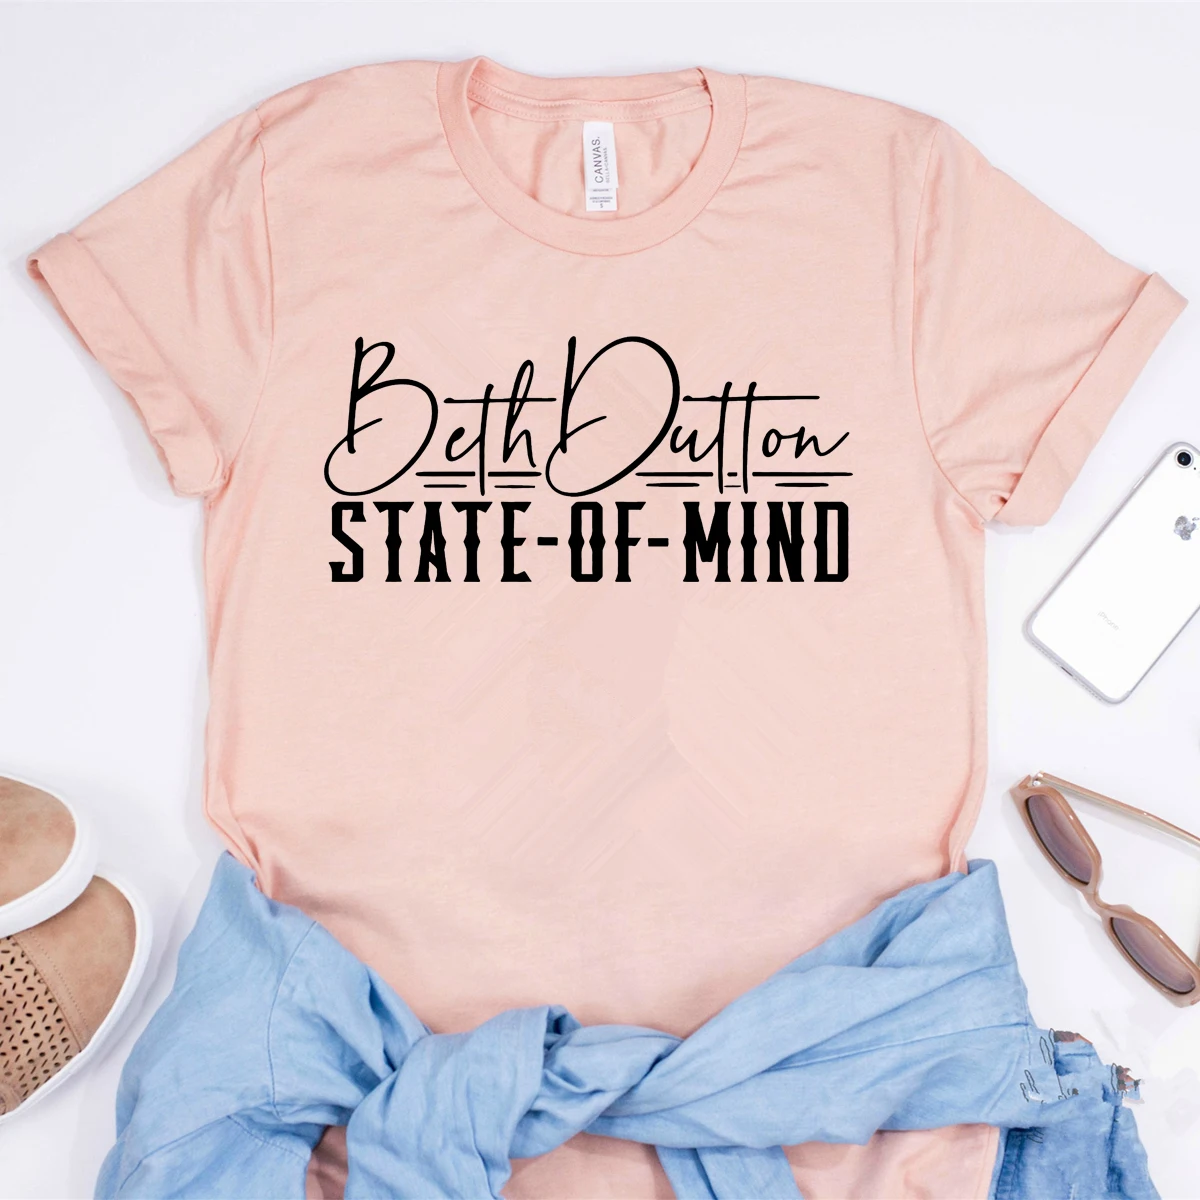 

Beth Dutton State of Mind T-shirt Women Funny Beth Dutton Top Yellowstone Shirts Women Casual Yellowstone Ranch Tee Fans Gift